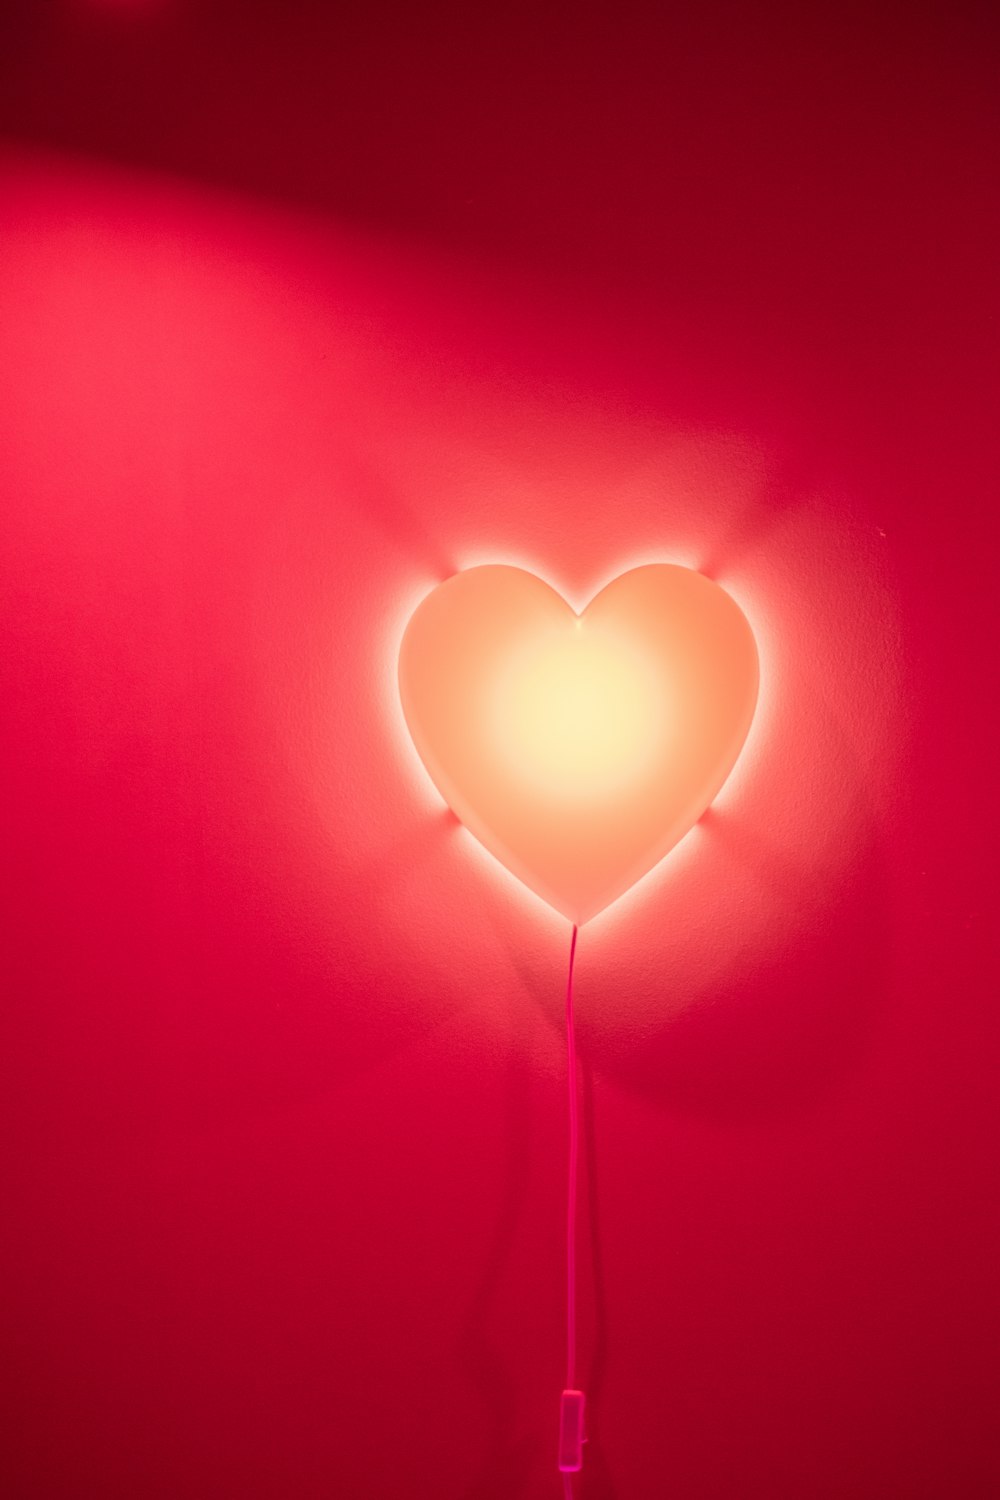 500+ Heart Images | Download Free Pictures On Unsplash